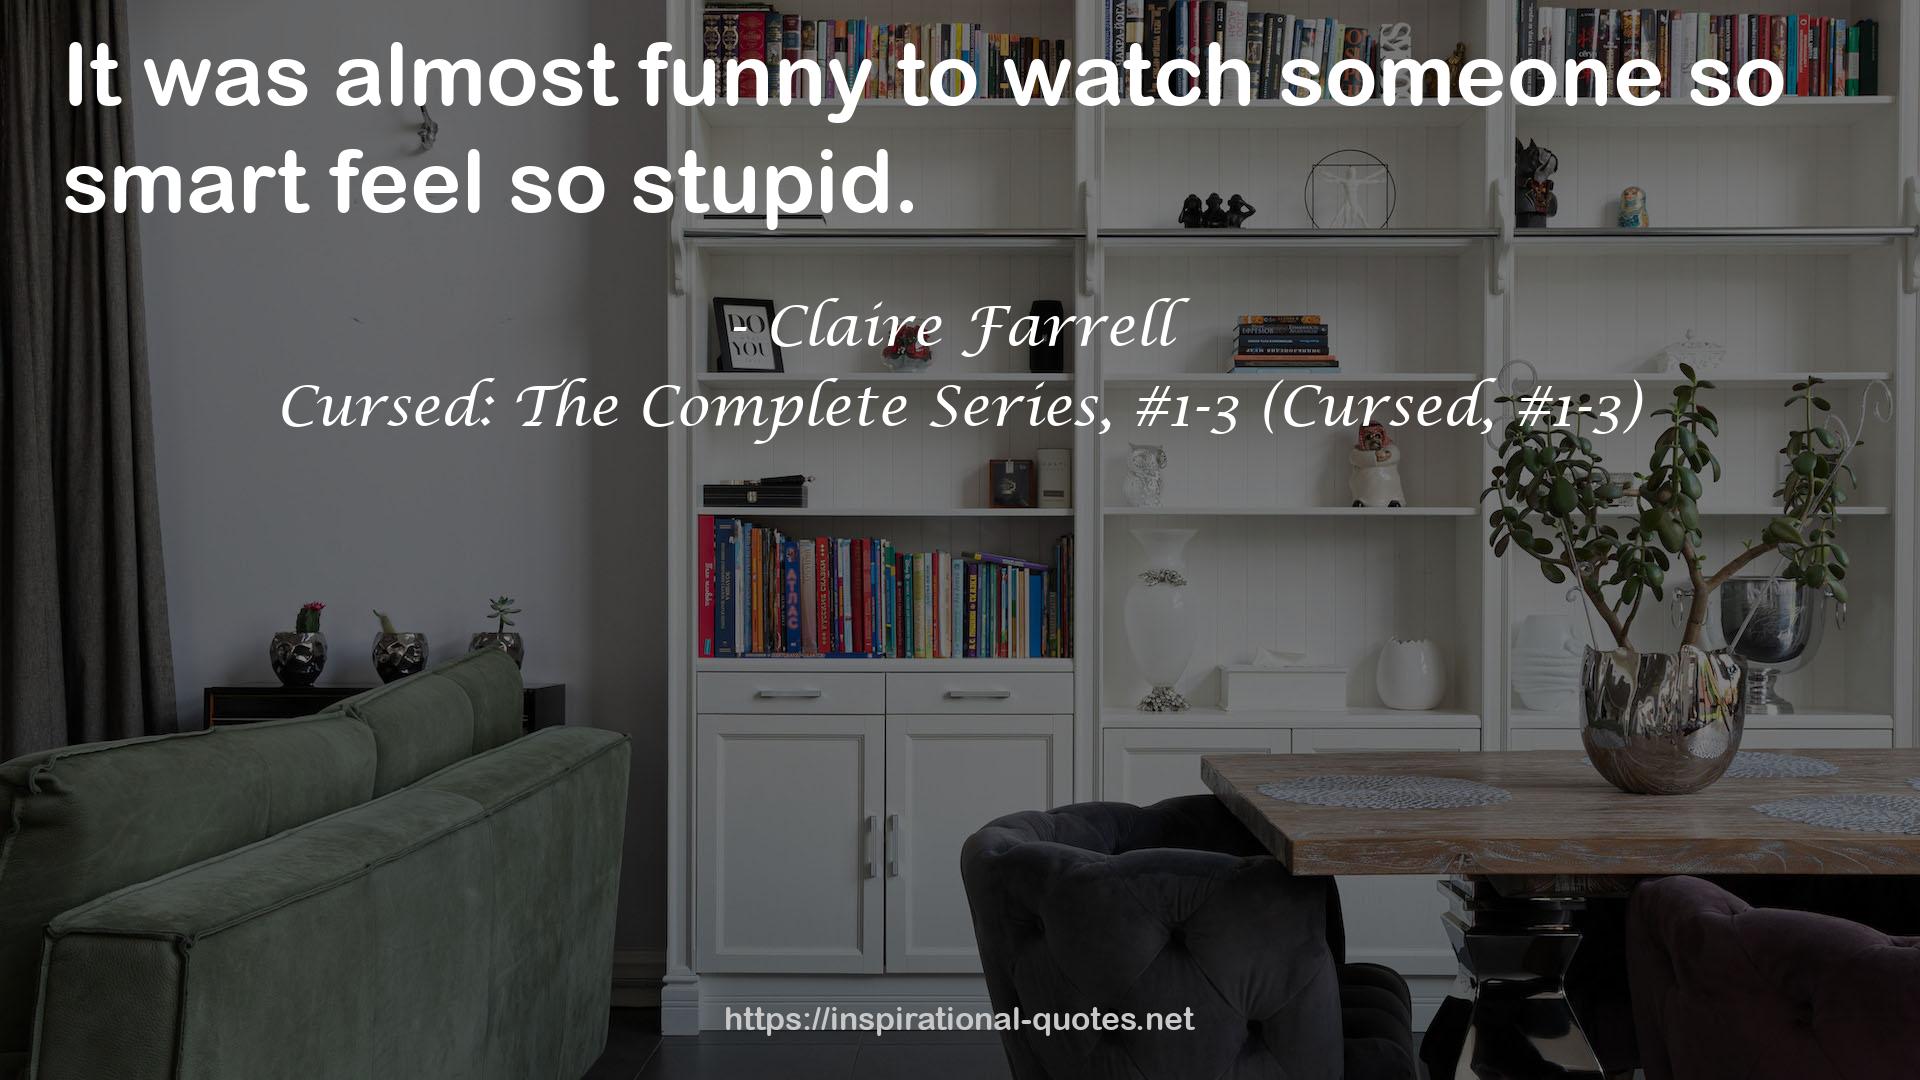 Cursed: The Complete Series, #1-3 (Cursed, #1-3) QUOTES